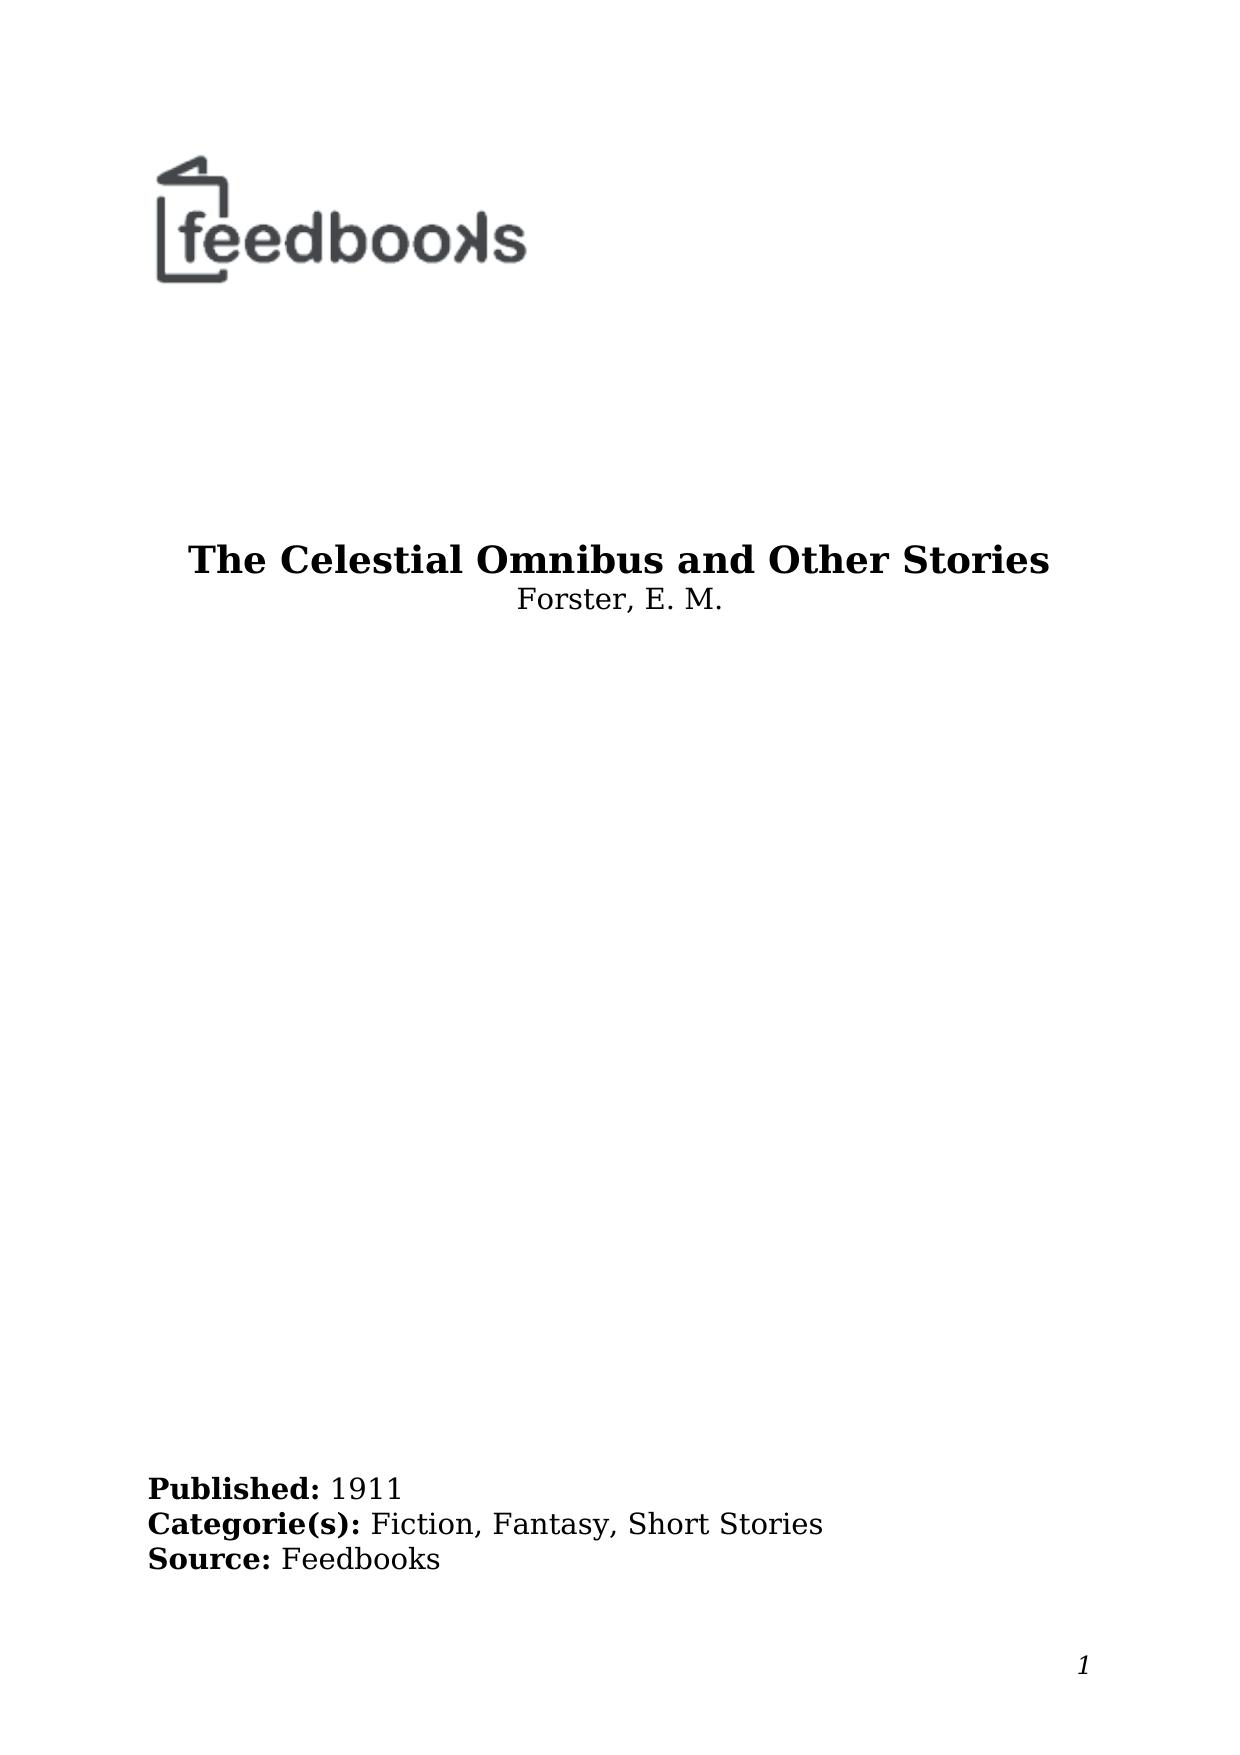 The Celestial Omnibusand Other Stories